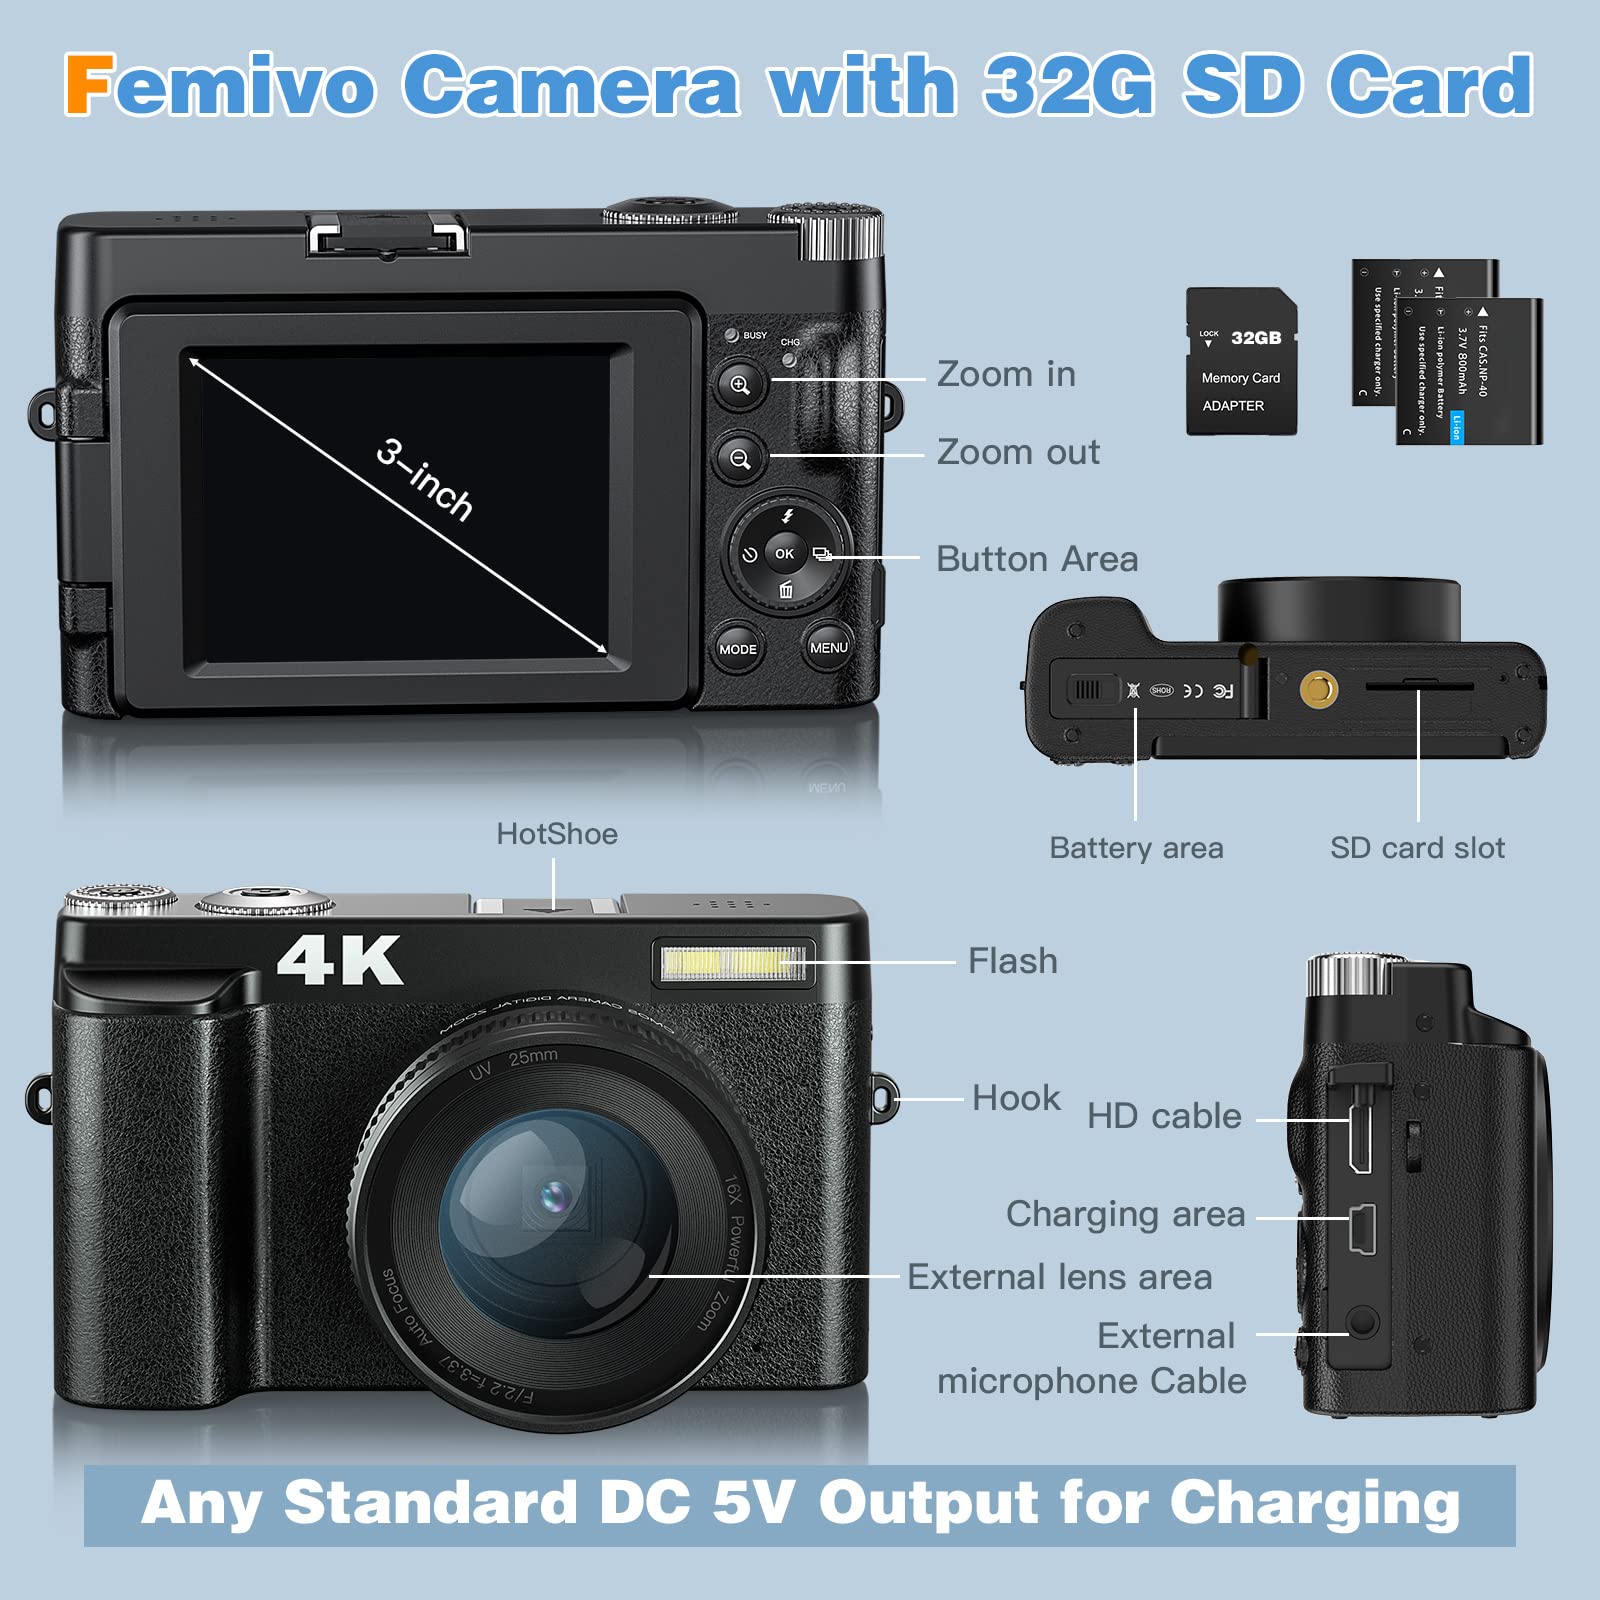 4K Digital Camera for Photography and Video Autofocus Anti-Shake, 48MP Vlogging Camera with SD Card, 3'' 180° Flip Screen Compact Camera with Flash, 16X Digital Zoom Travel Camera (2 Batteries)